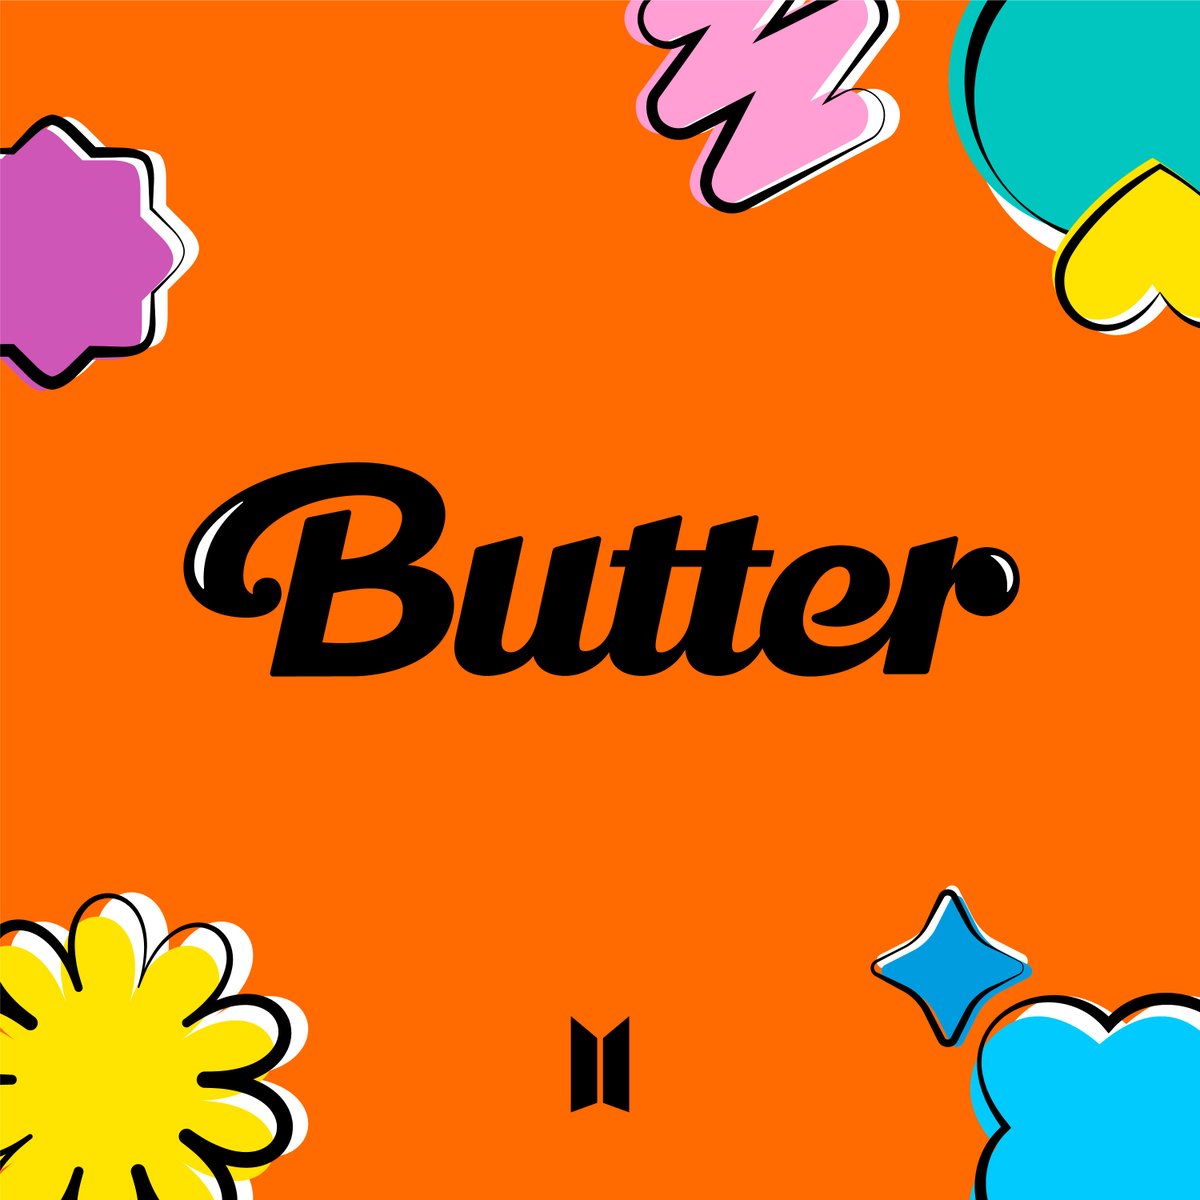 Cover art for『BTS - Permission to Dance』from the release『Butter / Permission to Dance』